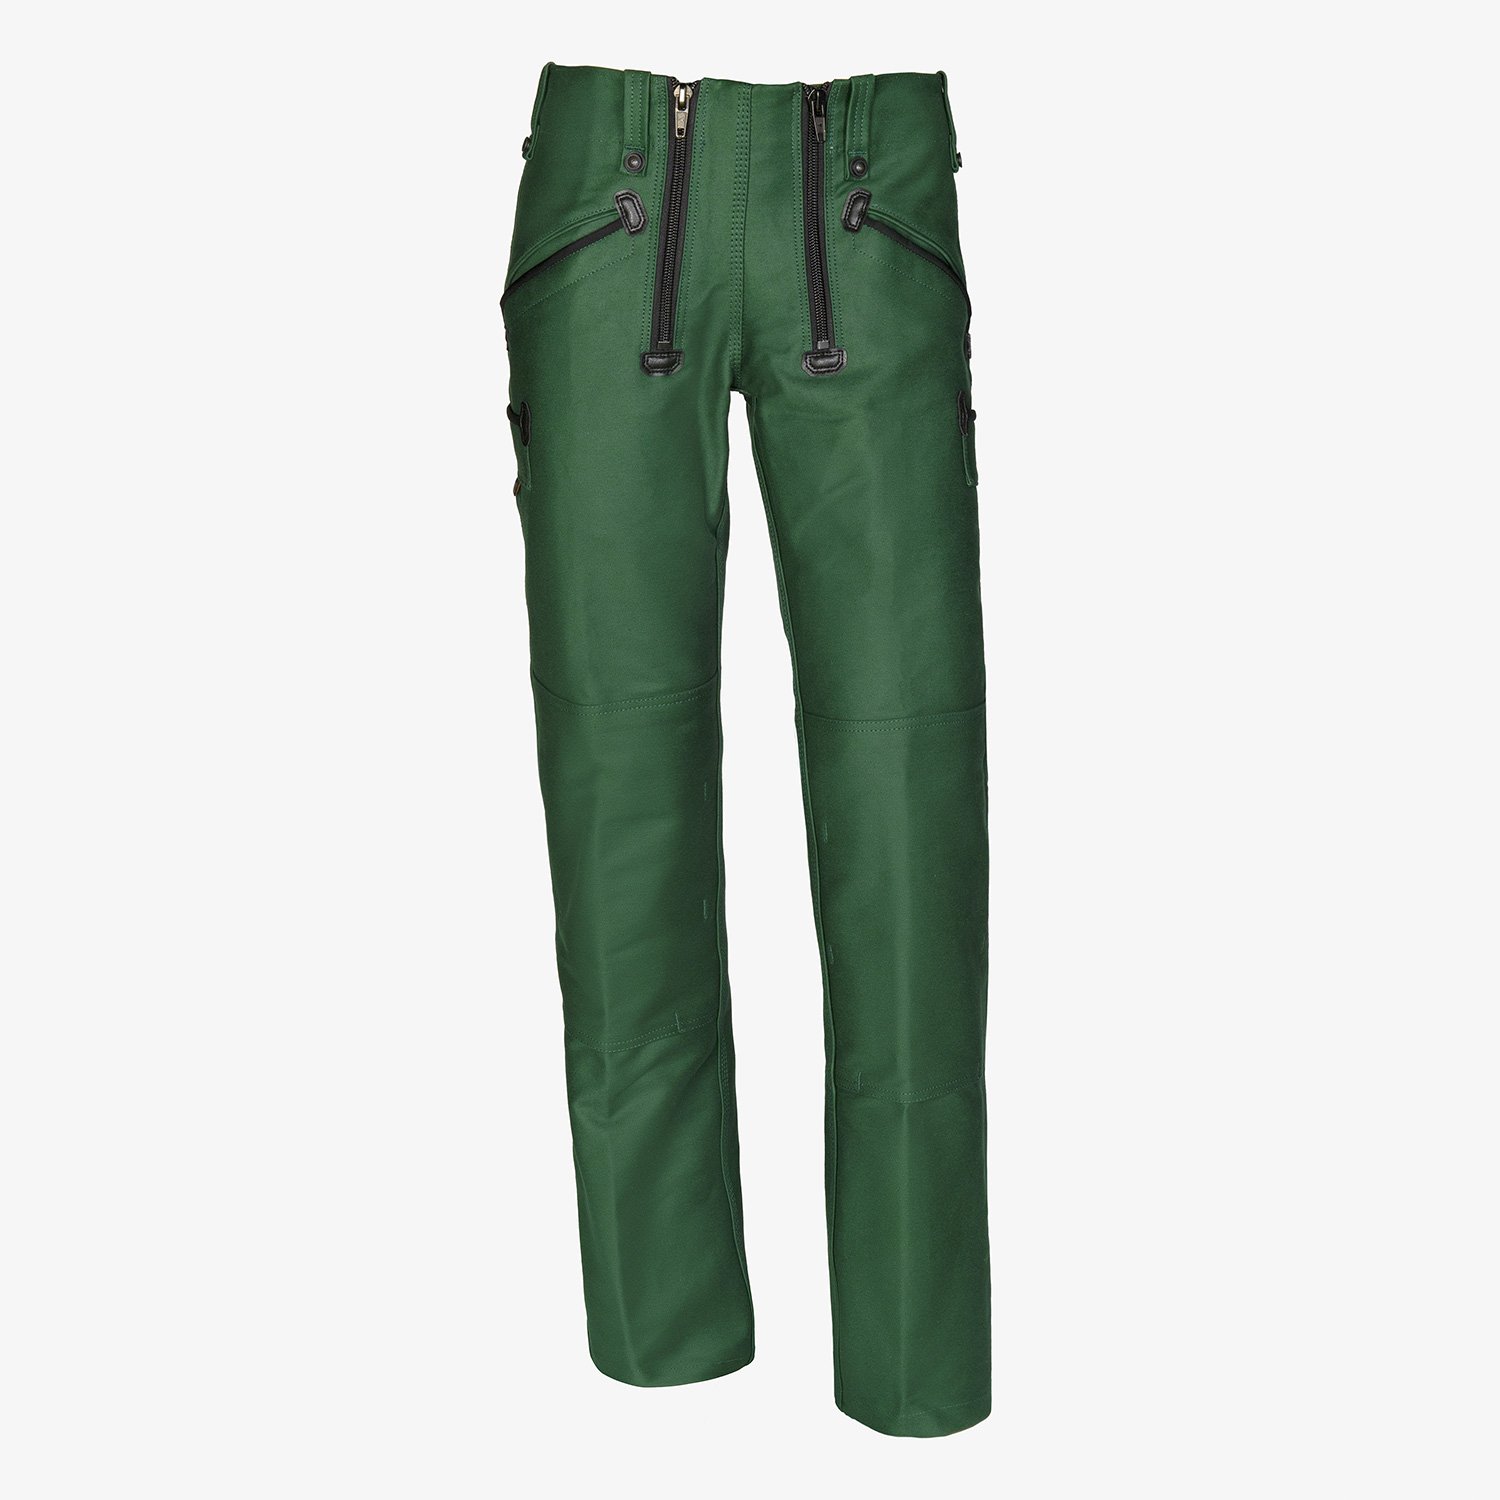 ALFRED trousers twisted double pilot without bell bottom